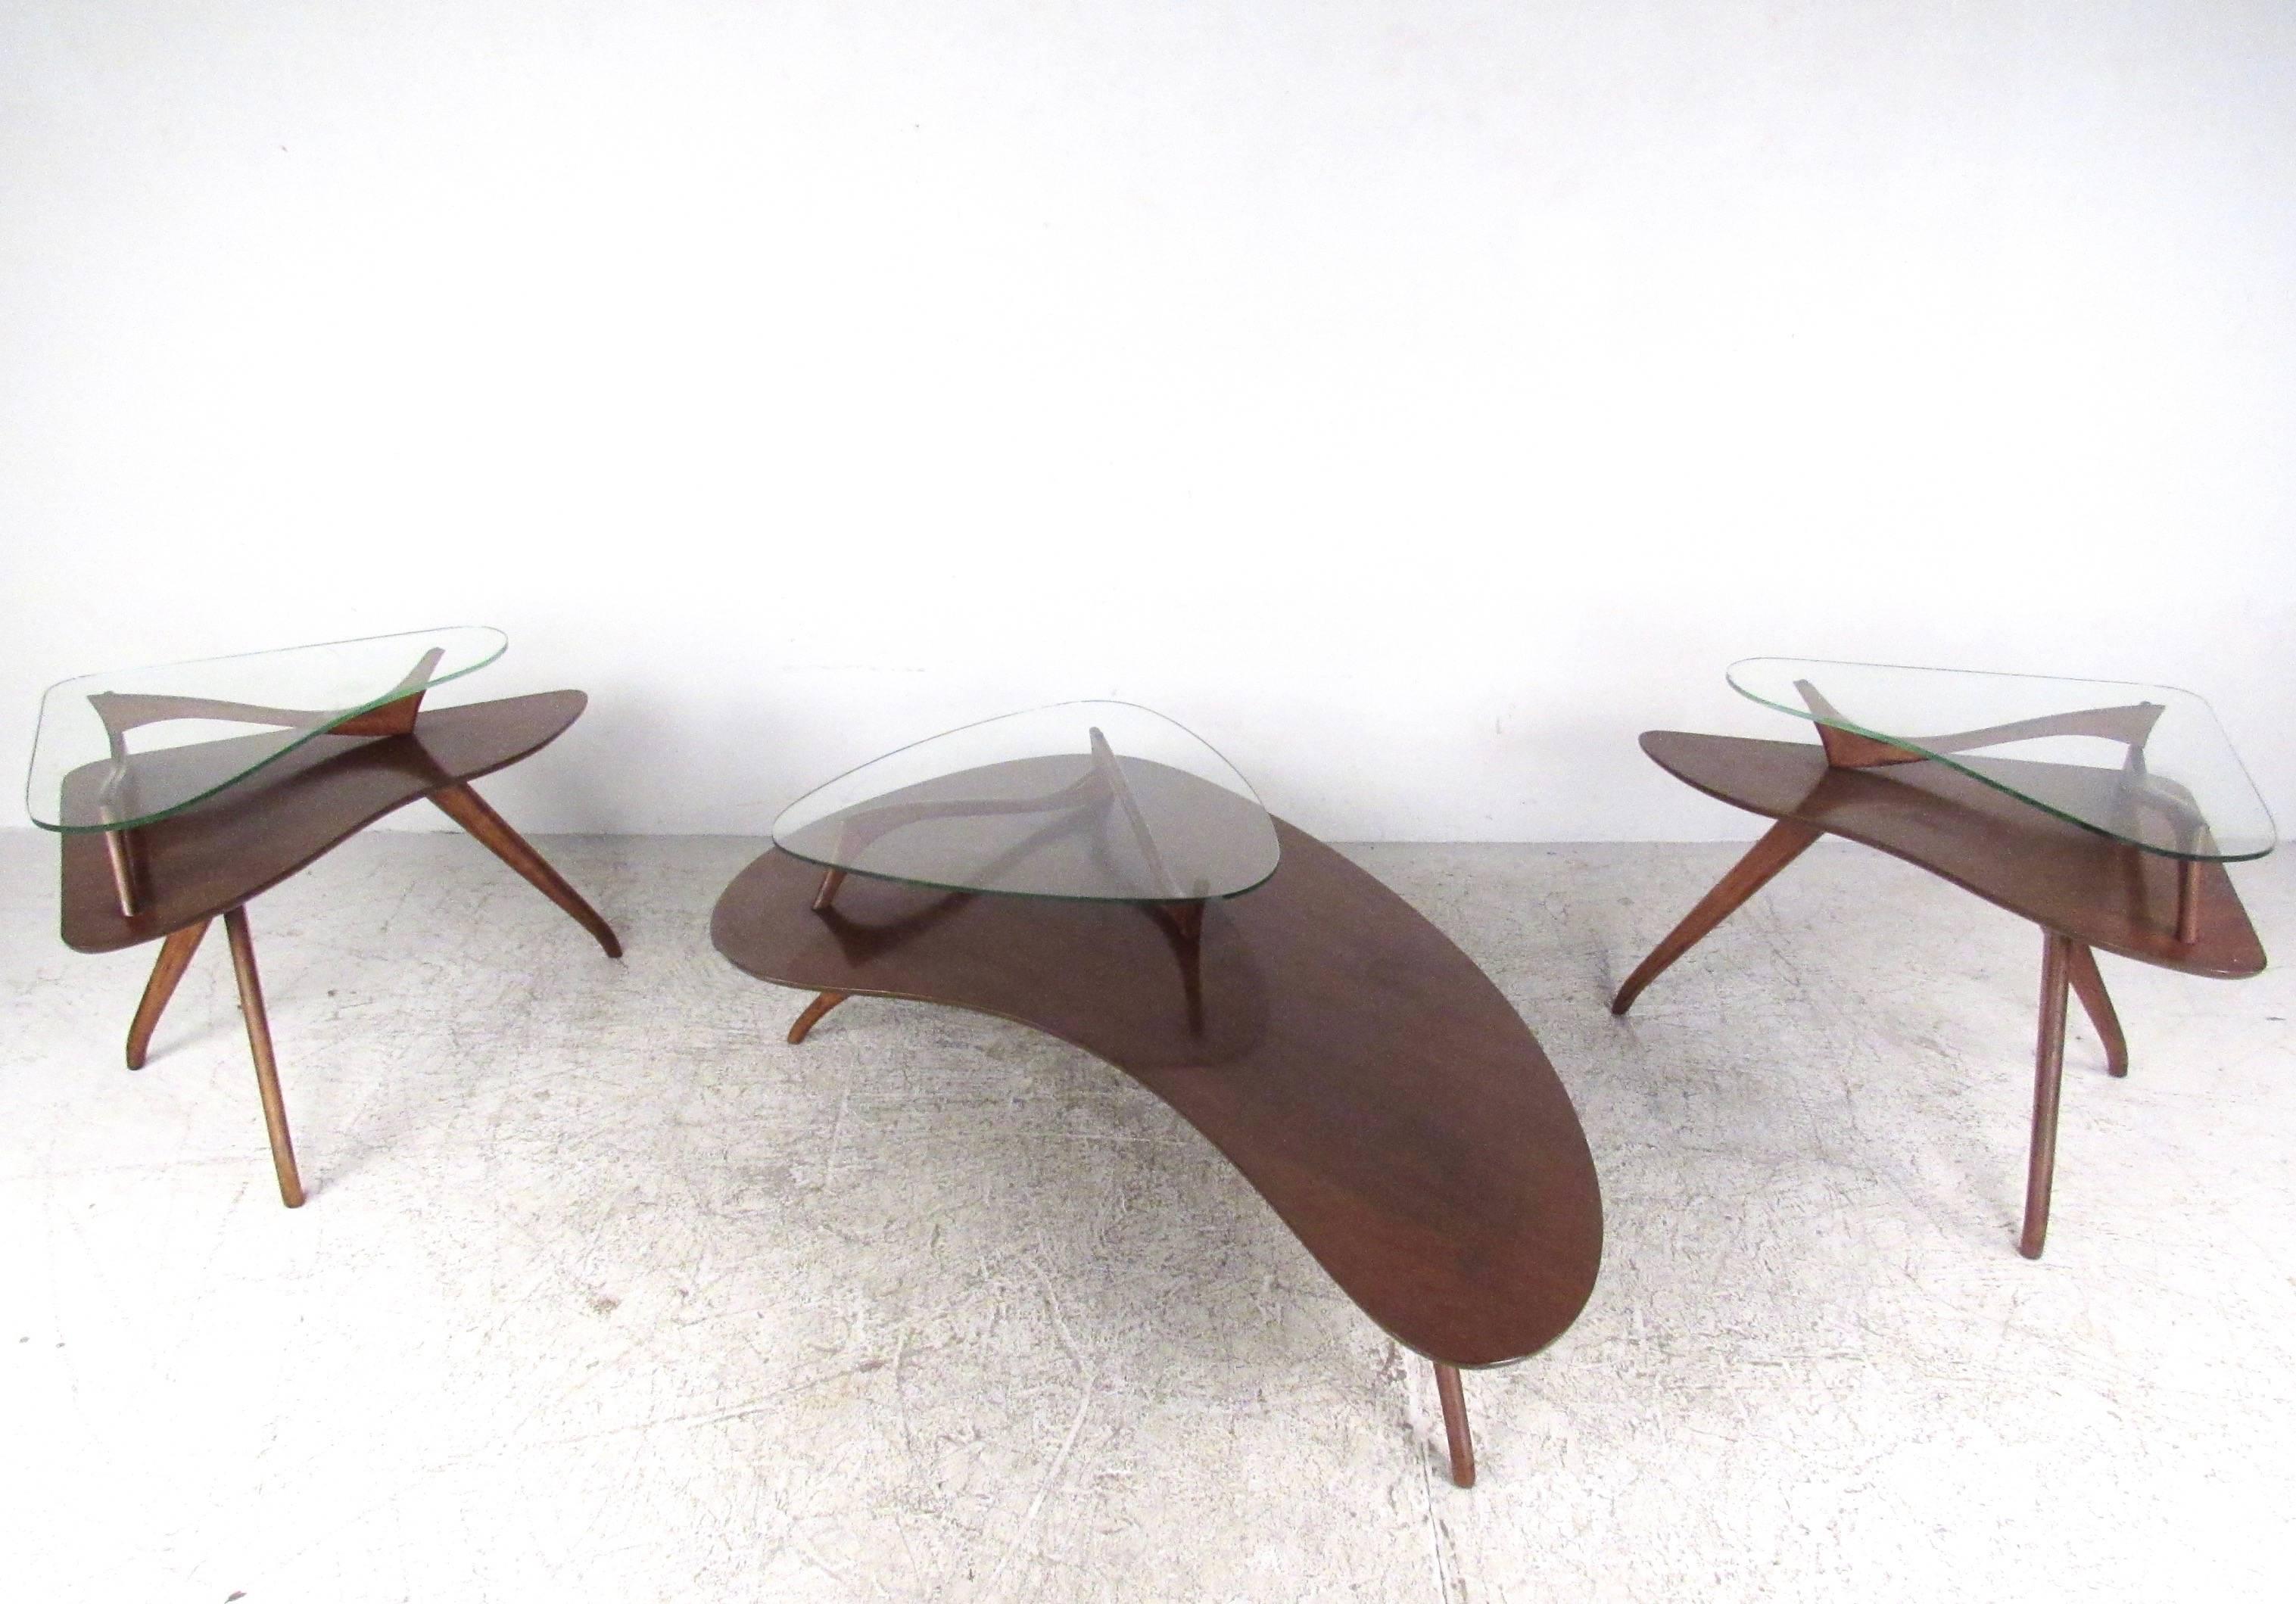 This stunning set of three sculptural tables features the unique design style of Mid-Century master Vladimir Kagan. Uniquely tapered legs, biomorphic style tops, and unique second tier glass tops set this stylish set of tables apart from other